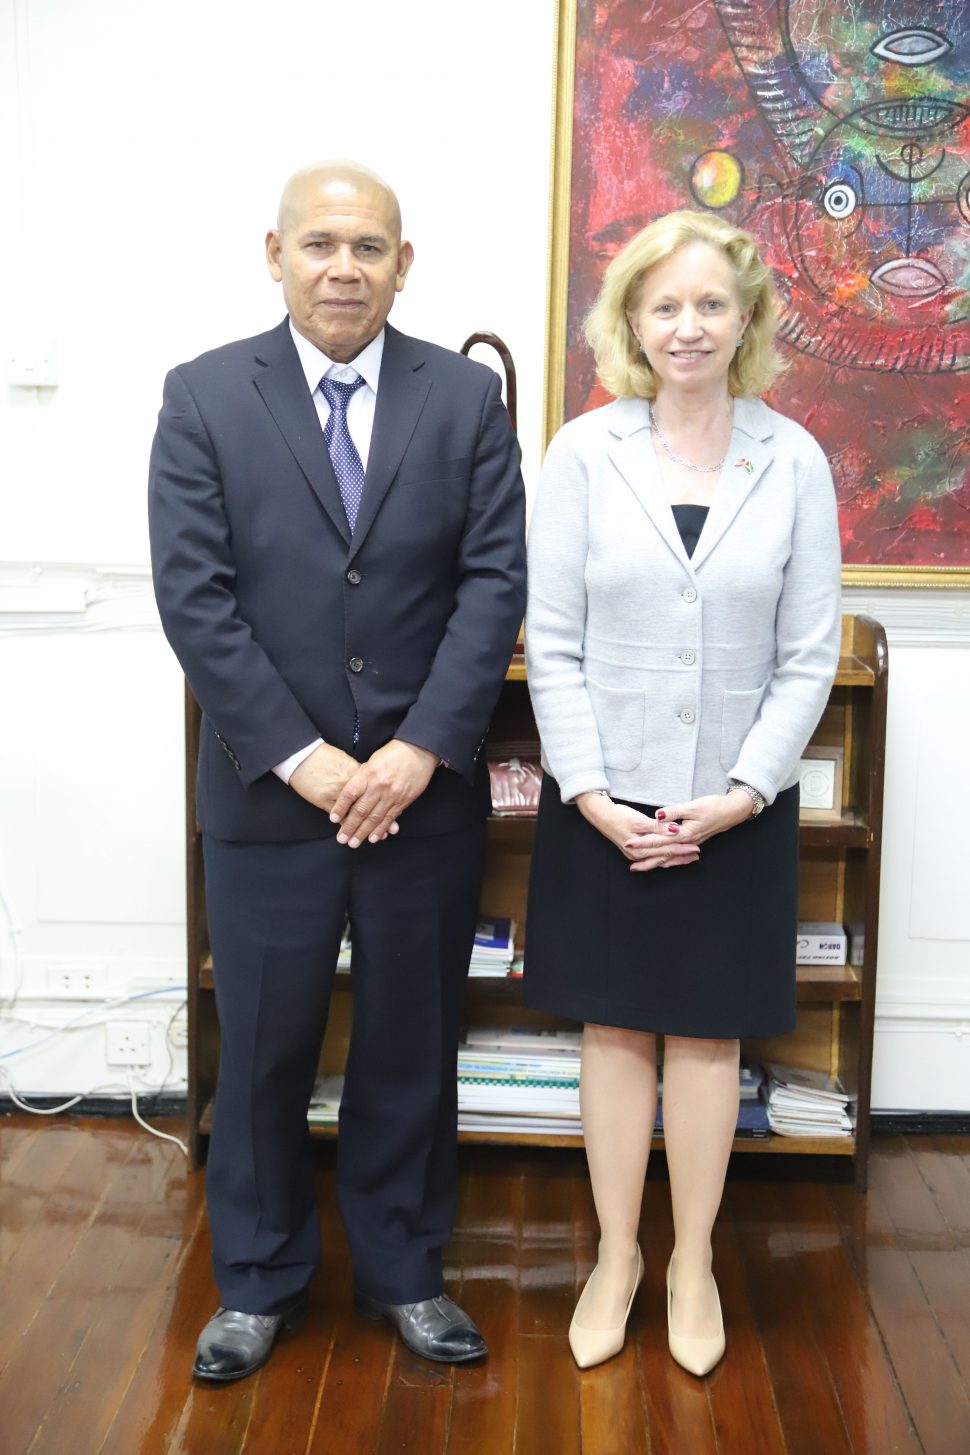  Minister of Social Cohesion Dr. George Norton with the newly-appointed United States Ambassador to Guyana Sarah-Ann Lynch on Friday after a courtesy call by the new ambassador. Following their meeting, Norton stated that they spoke about the development of the arts in Guyana and the possibility of collaborating to have workshops hosted by artists from the United States with an emphasis on the marketing of art. Norton added that the ambassador express-ed her desire to work with the ministry and he noted that they may be looking to create policies to help artists to be better able to profit from their work. (Photo by Terrence Thompson)
